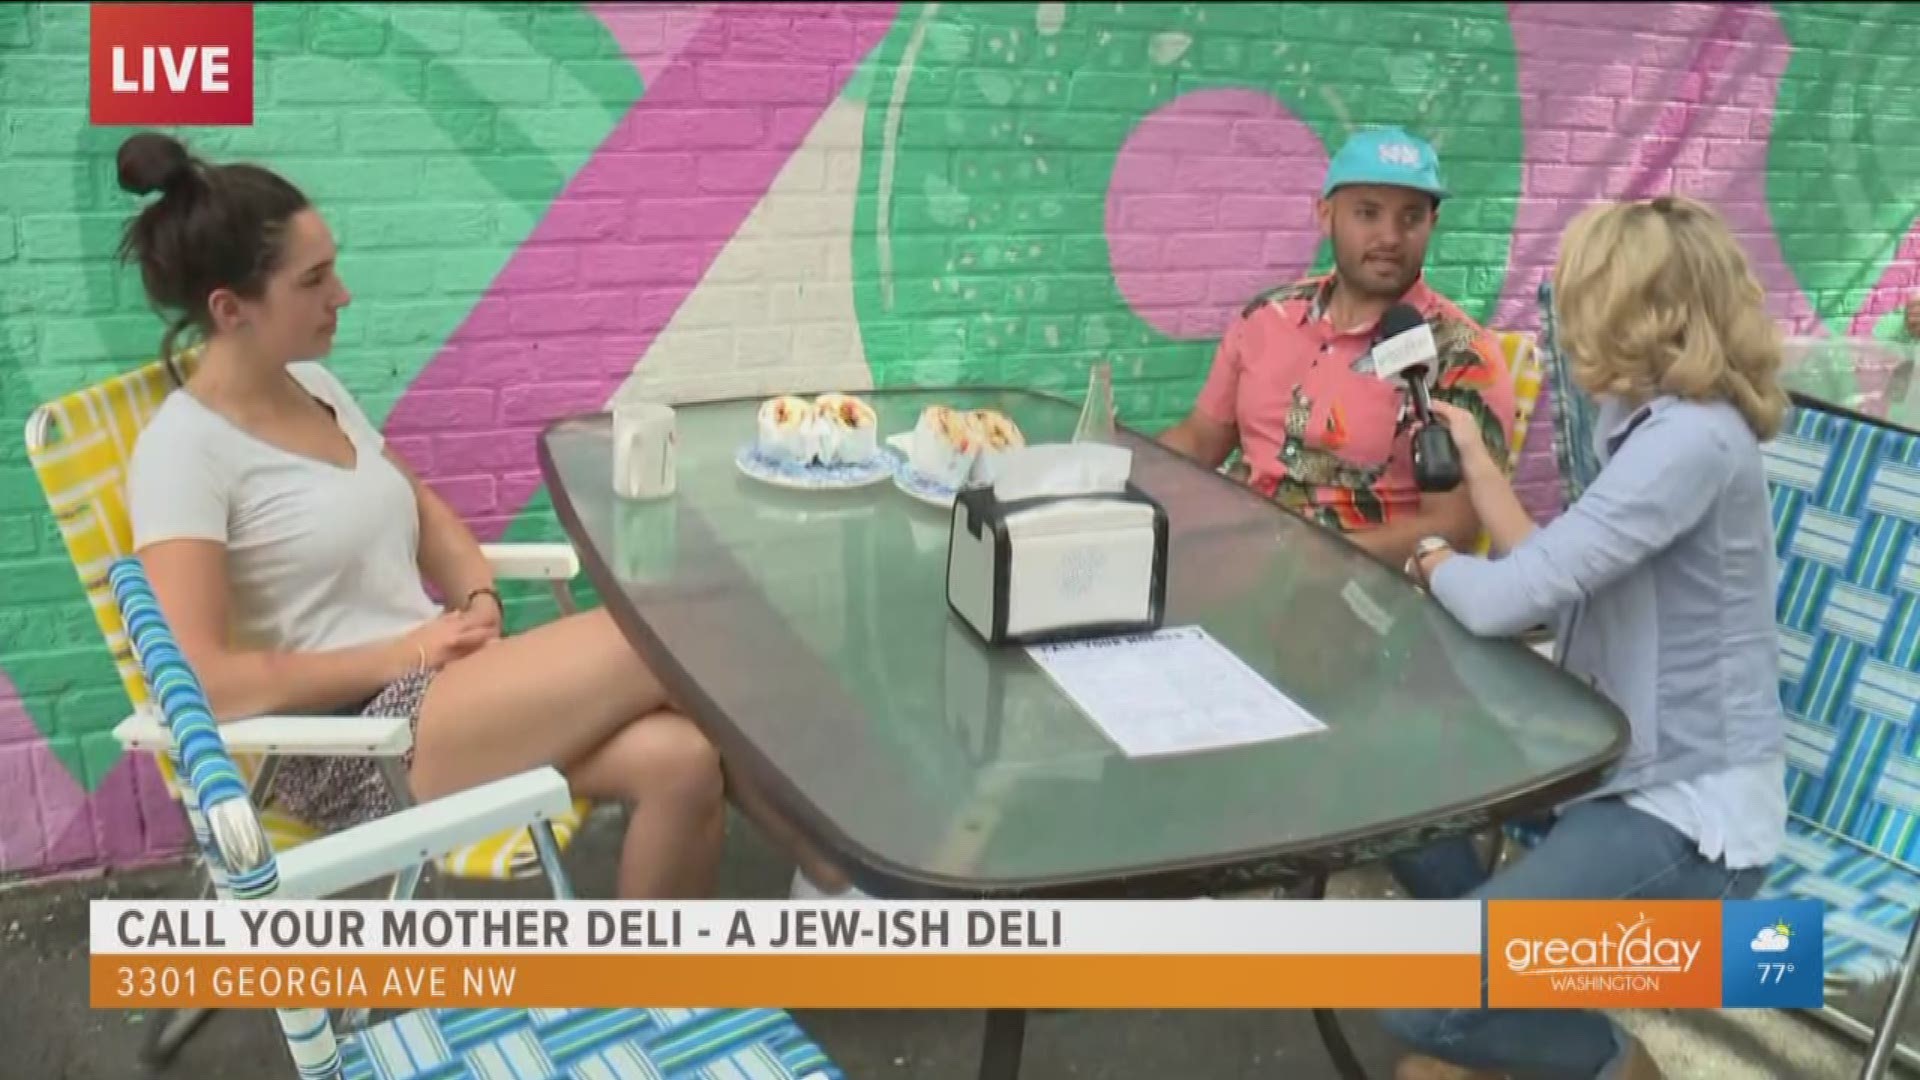 Call Your Mother deli is a Jewish Deli in the Petworth neighborhood that has a nice DC vibe.  Andi check out some of the food options that has everyone talking!